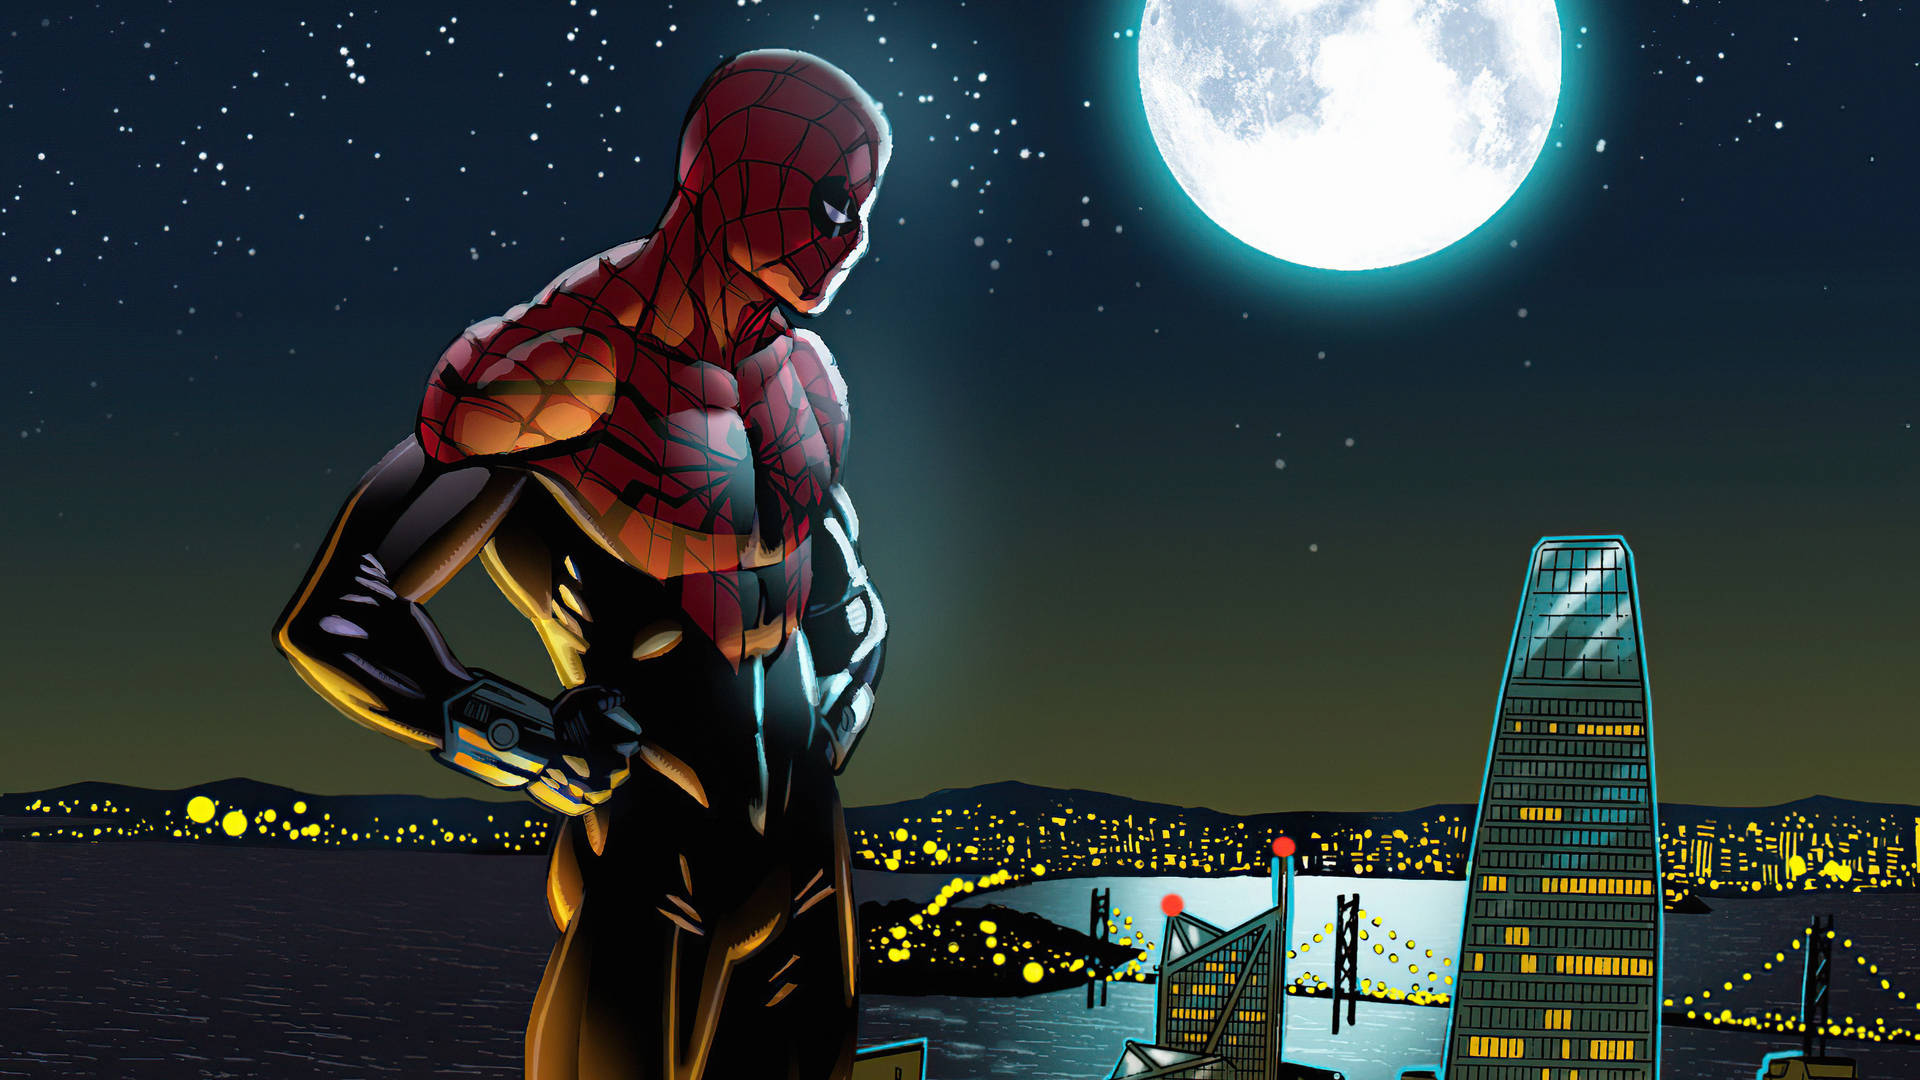 Download The Superior Spider-man Full Moon Wallpaper 